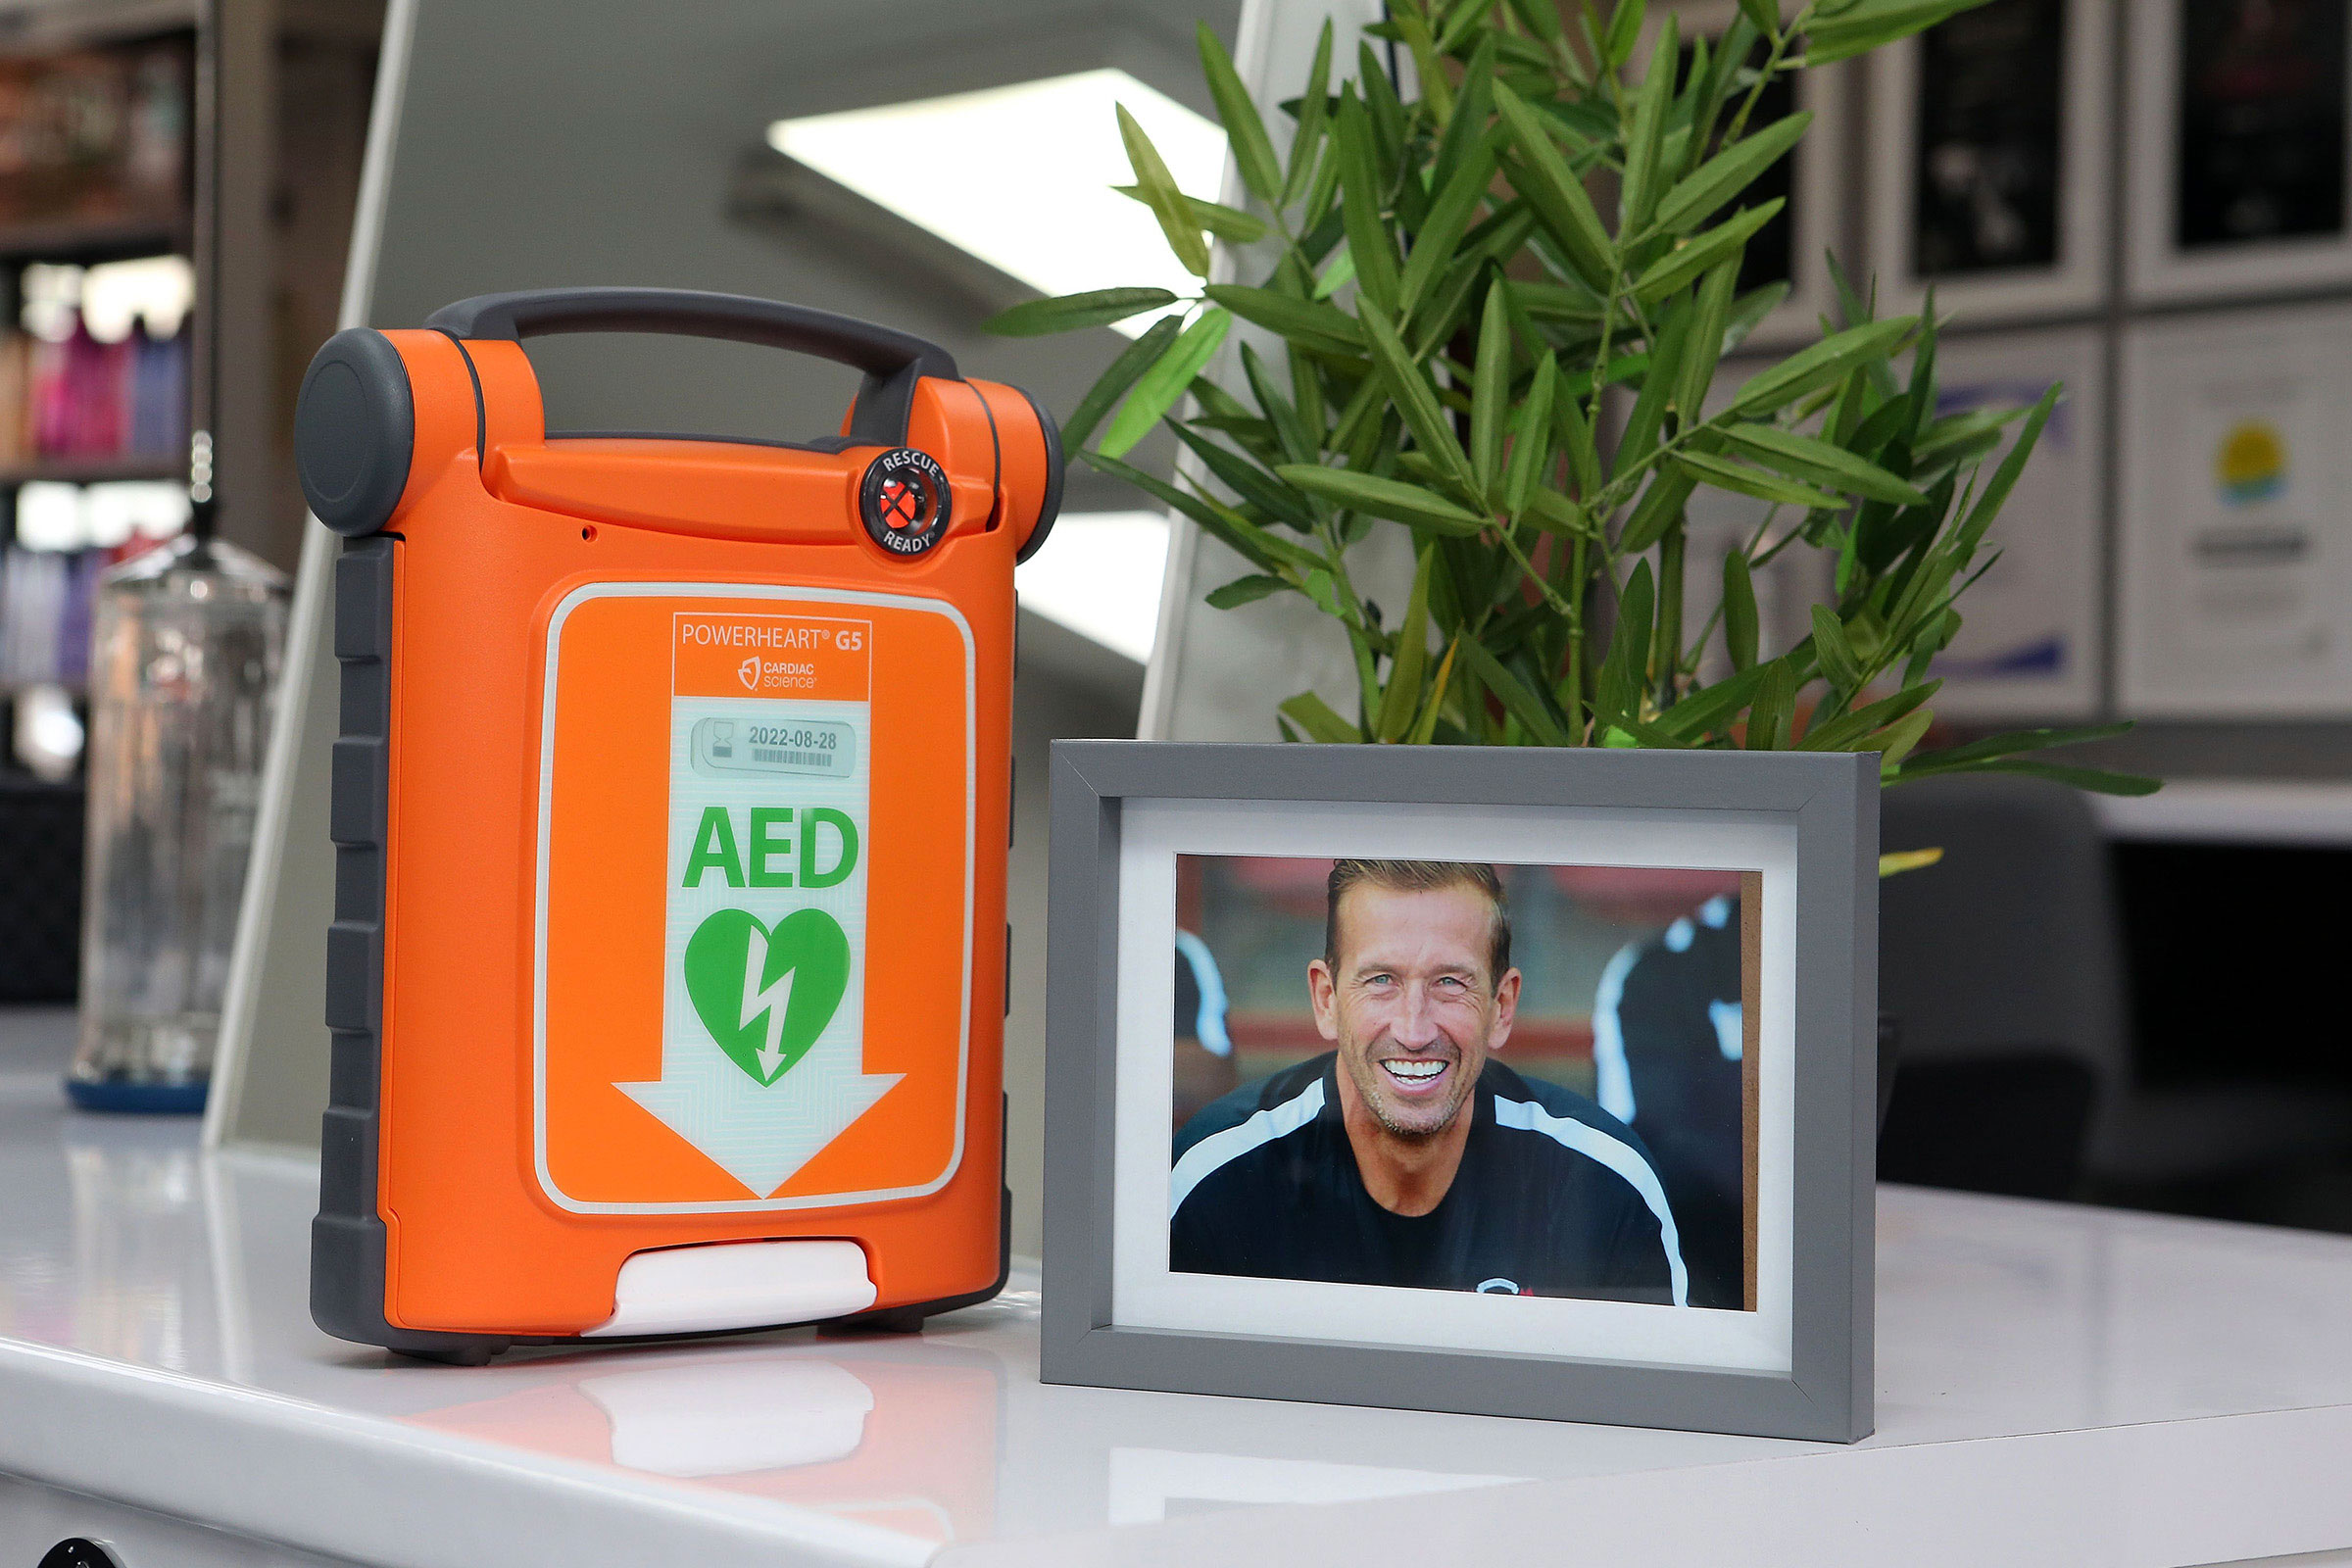 Brentwood Contracting Group Is The Latest JE3 Defibrillator Recipient